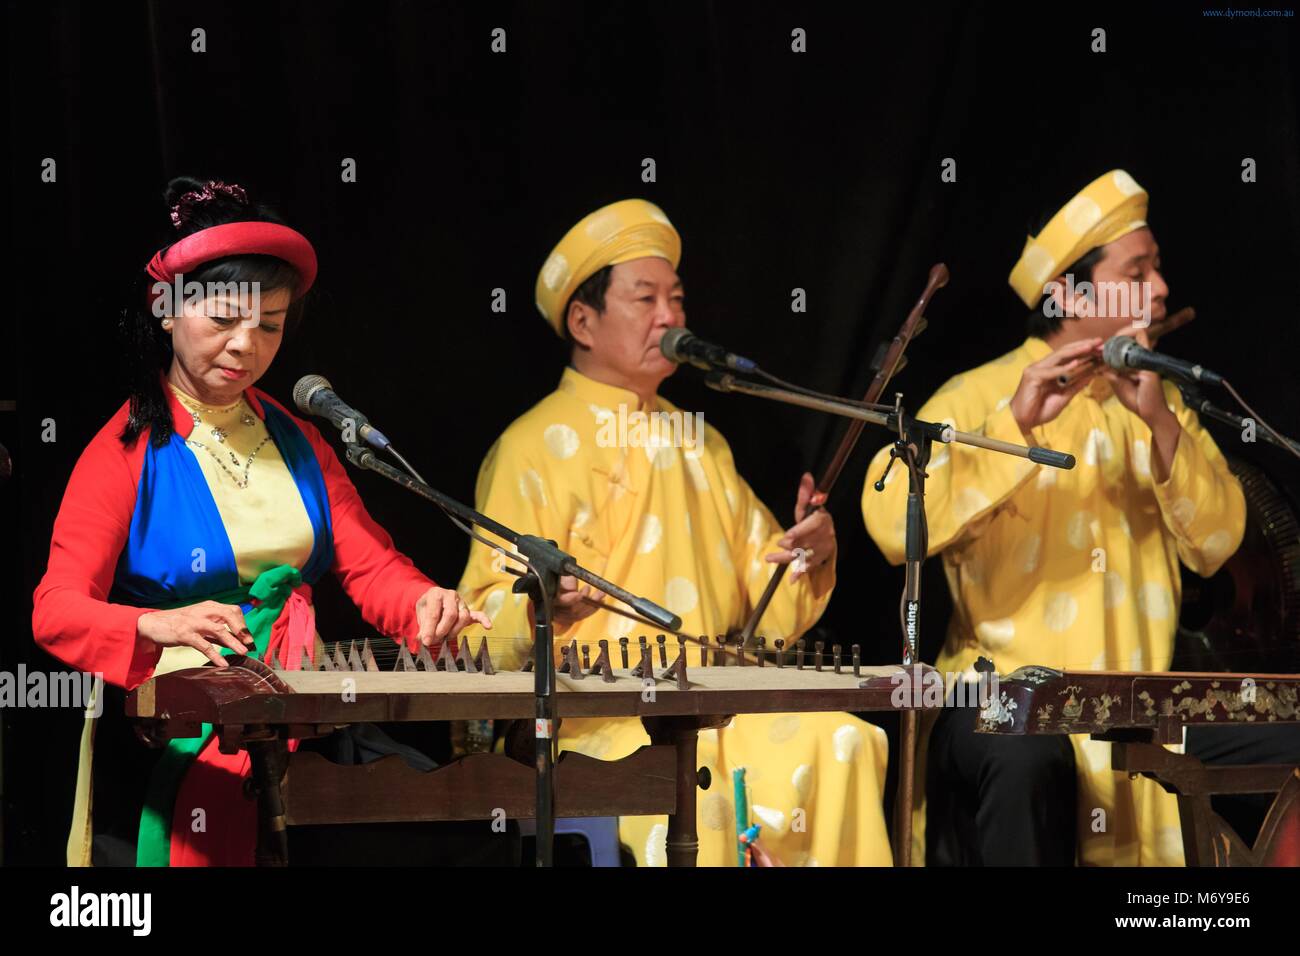 Musicians provide narration and music during a performance at the Golden Dragon Water Puppet Theatre in Ho Chi Minh City, Vietnam Stock Photo